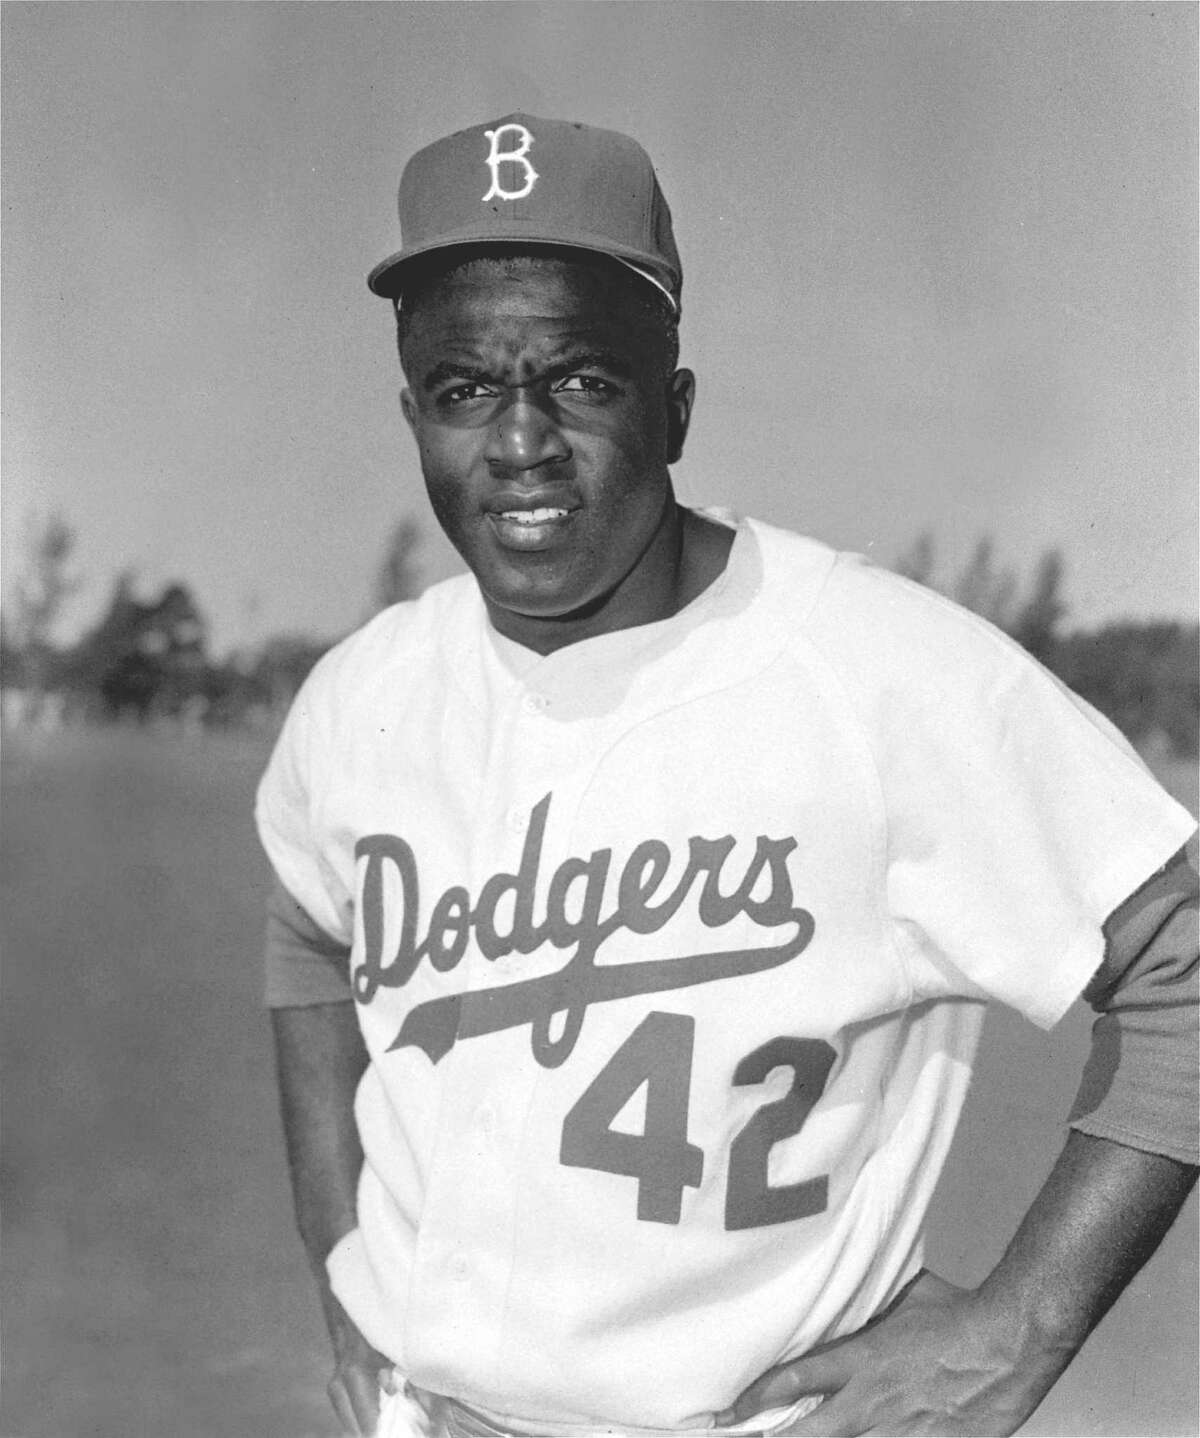 Jackie Robinson, former Brooklyn Dodger infielder, is shown in this March, 1956 file photo. Robinson will be nominated for the Congressional Gold Medal in recognition of his achievements as the first black player in Major League Baseball, the Boston Red Sox said. (AP Photo, File) HOUCHRON CAPTION (06/26/2004): ROBINSON.